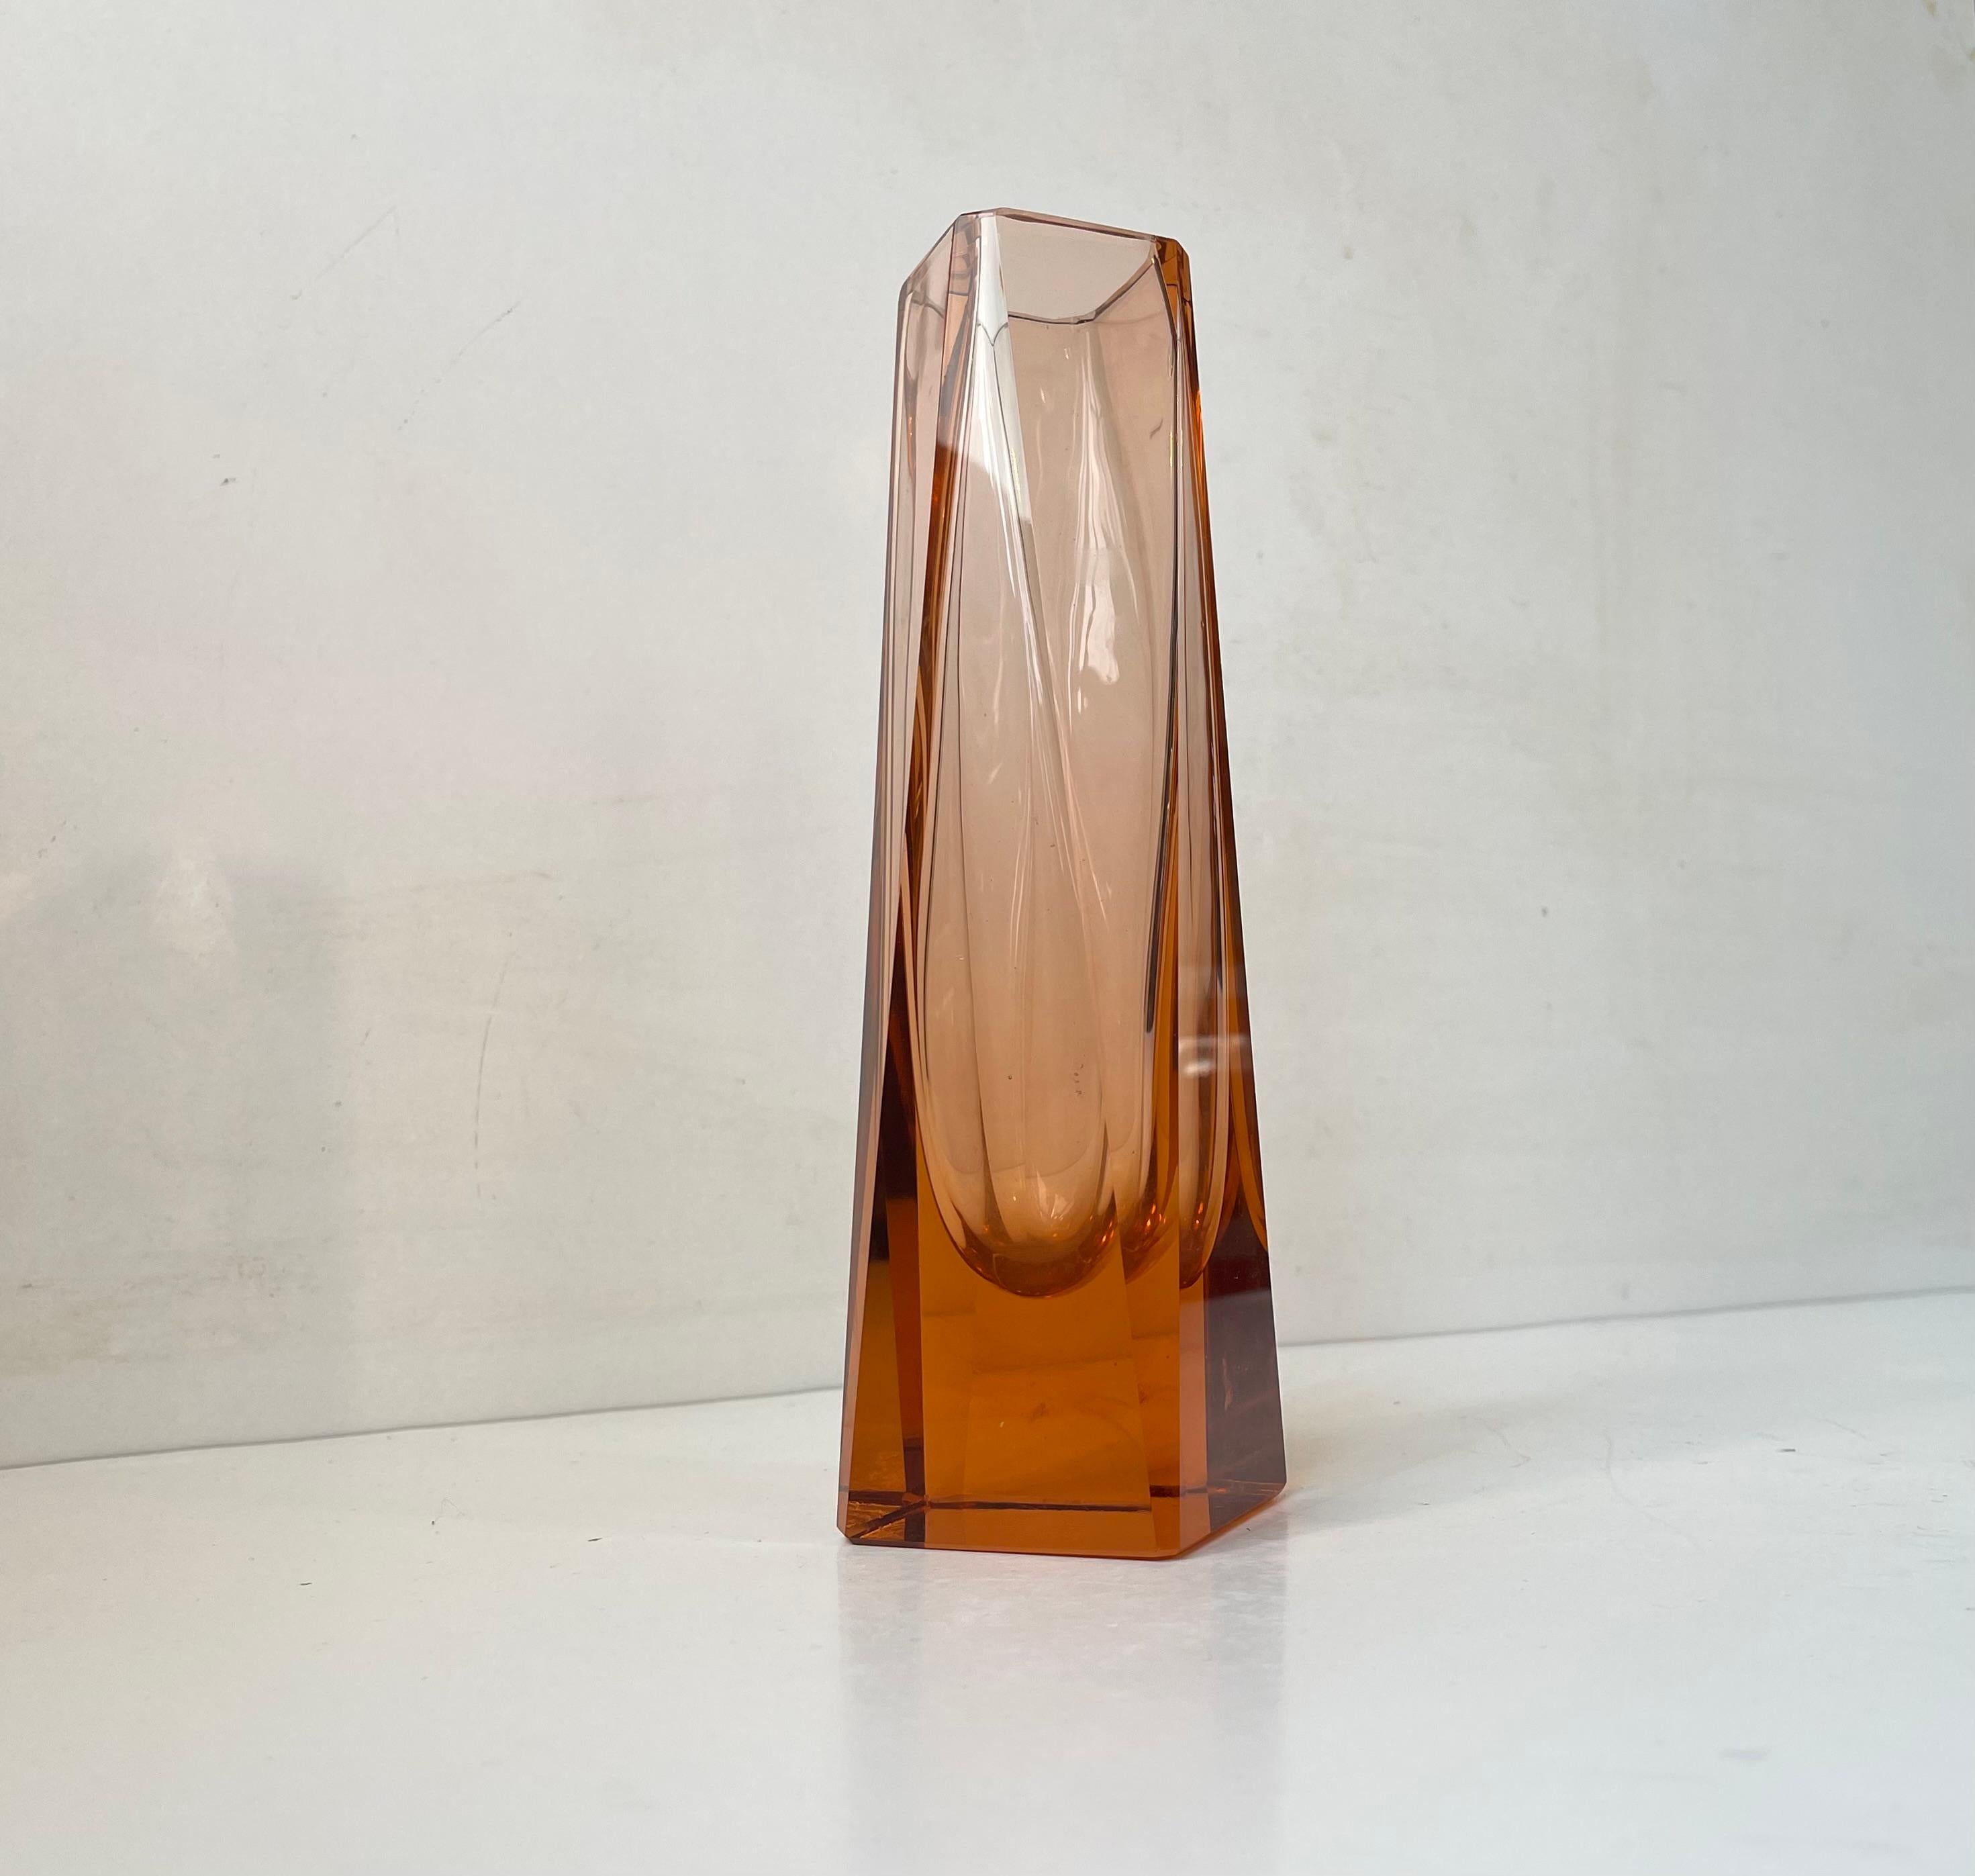 Tulipano block vase in faceted glass. Very rare peach or salmon in color. Hand-blown in to a mold with facets finished by hand. Designed and made at the Murano workshop of Alessandro Mandruzzato circa 1970-80. Measurements: H: 22 cm, W/D: 6 cm.